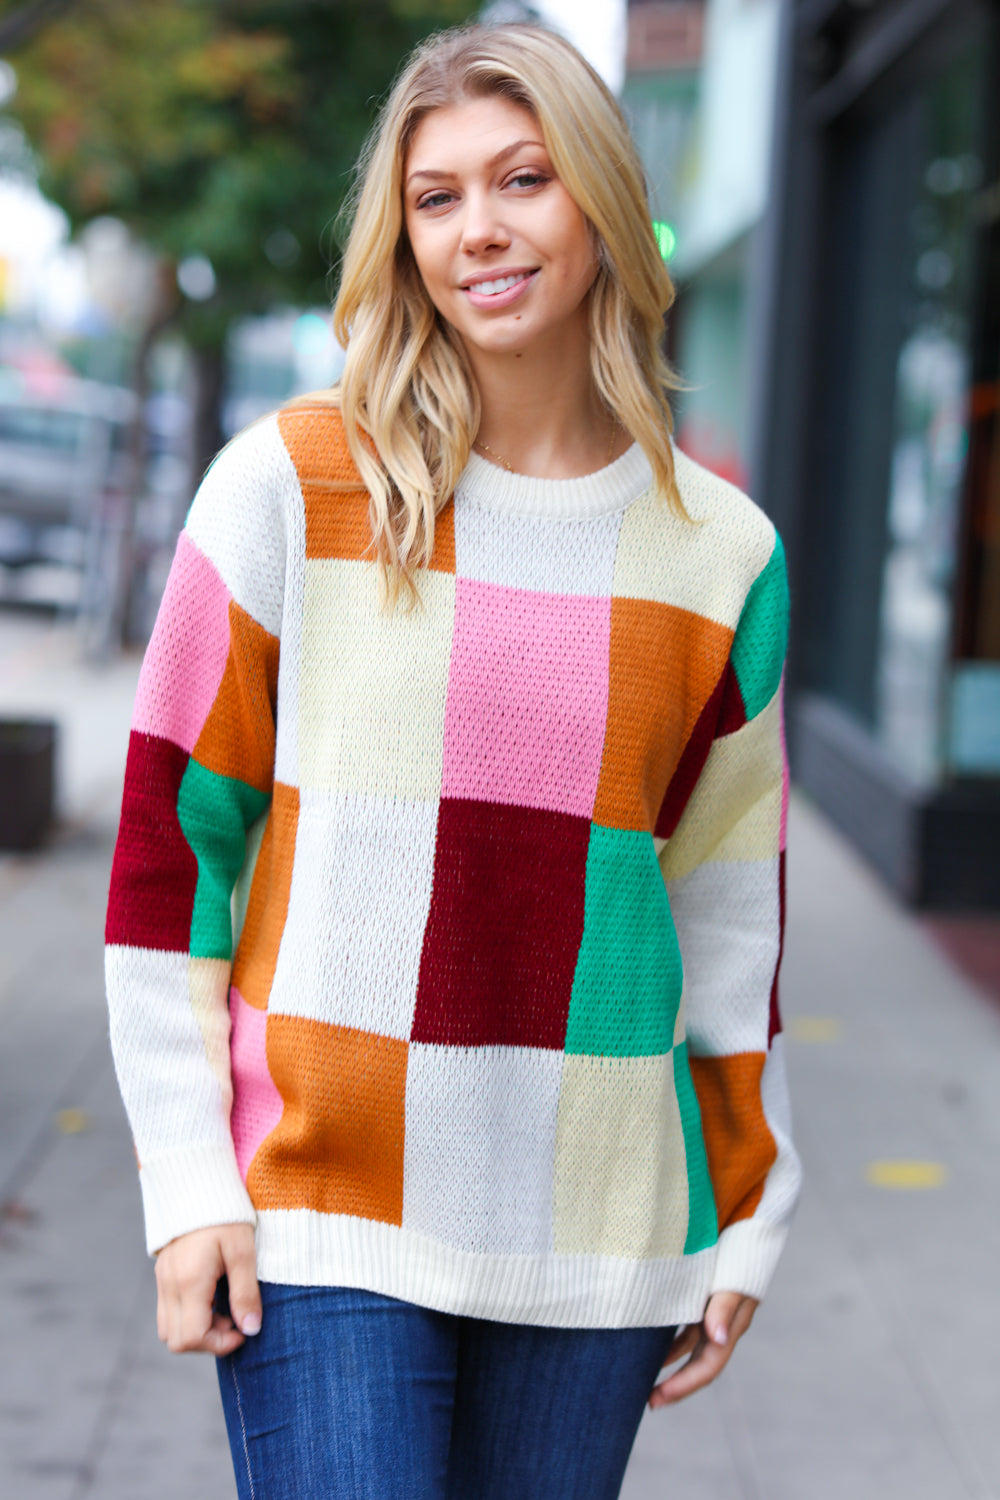 Adorable In Checker Jacquard Knit Sweater